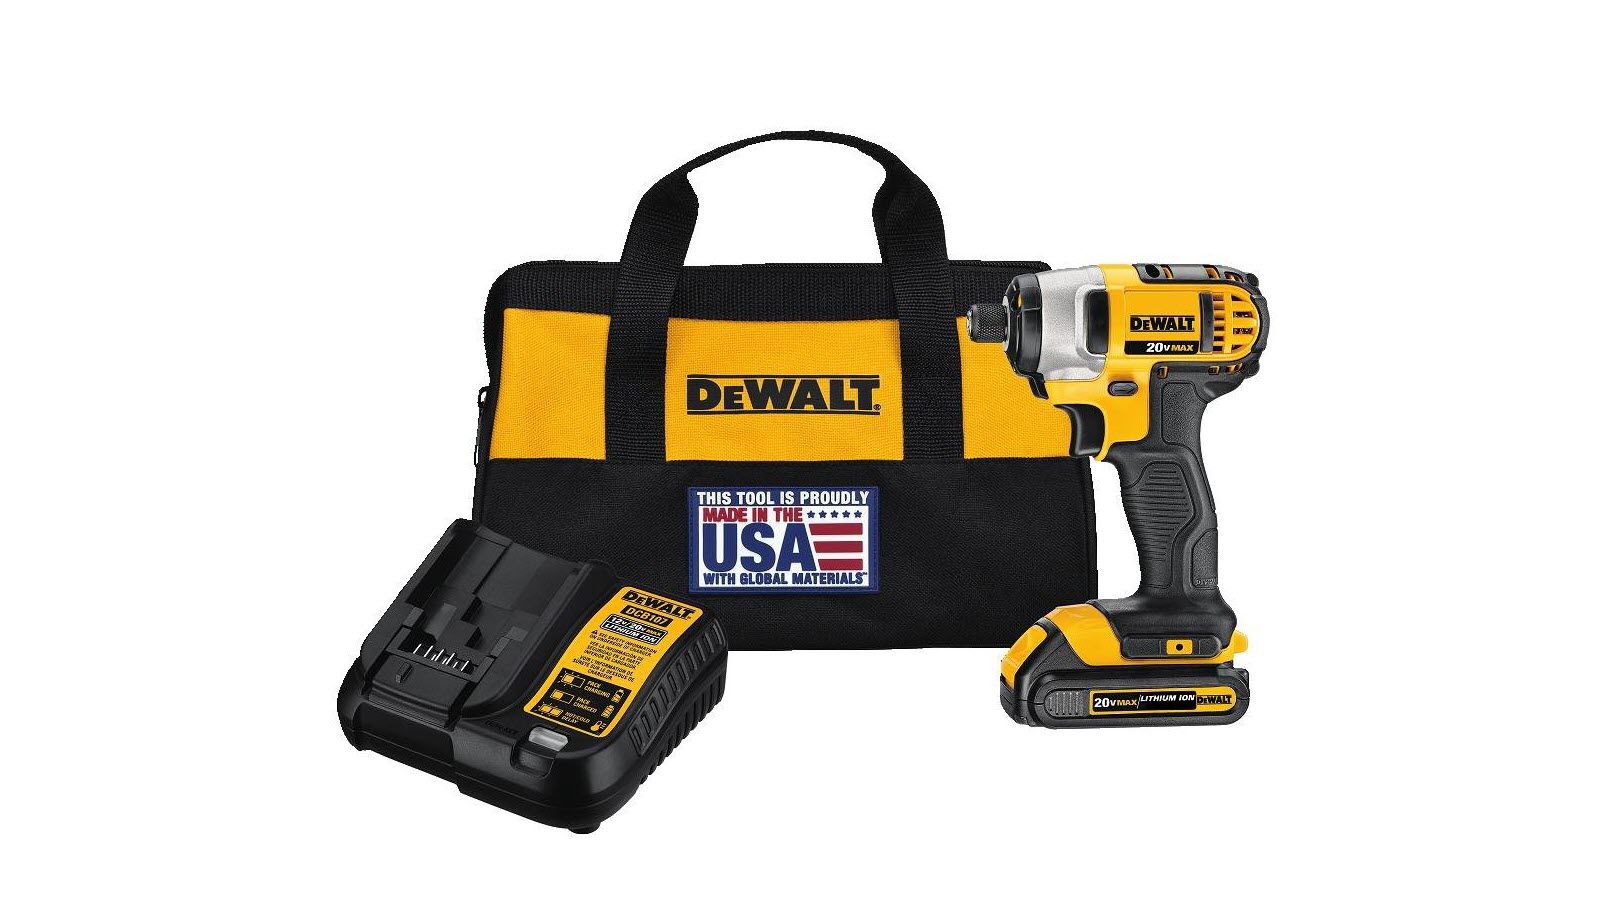 A DEWALT impact driver with battery, charger, and case.